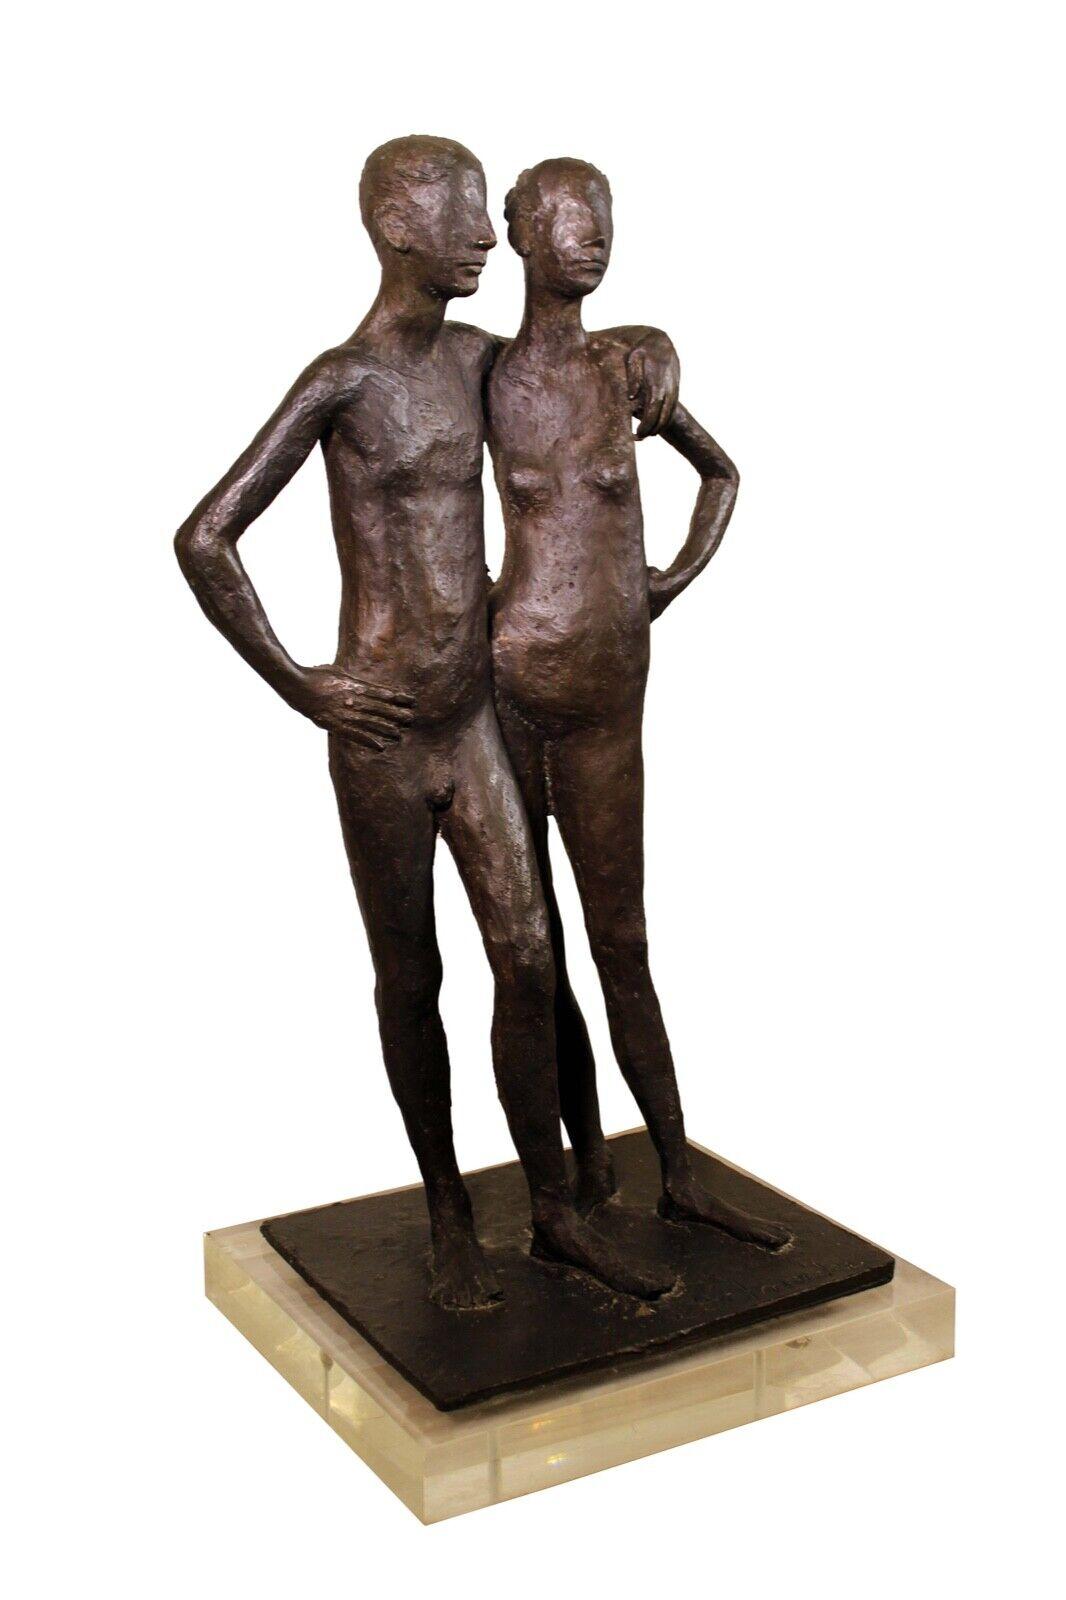 A contemplative bronze sculpture depicting a nude couple by Detroit based artist Arthur Schneider. Signed on the bottom right in the block stand. A romantic and intimate sculpture that alludes to the motif of companionship. Dimensions: 14.5